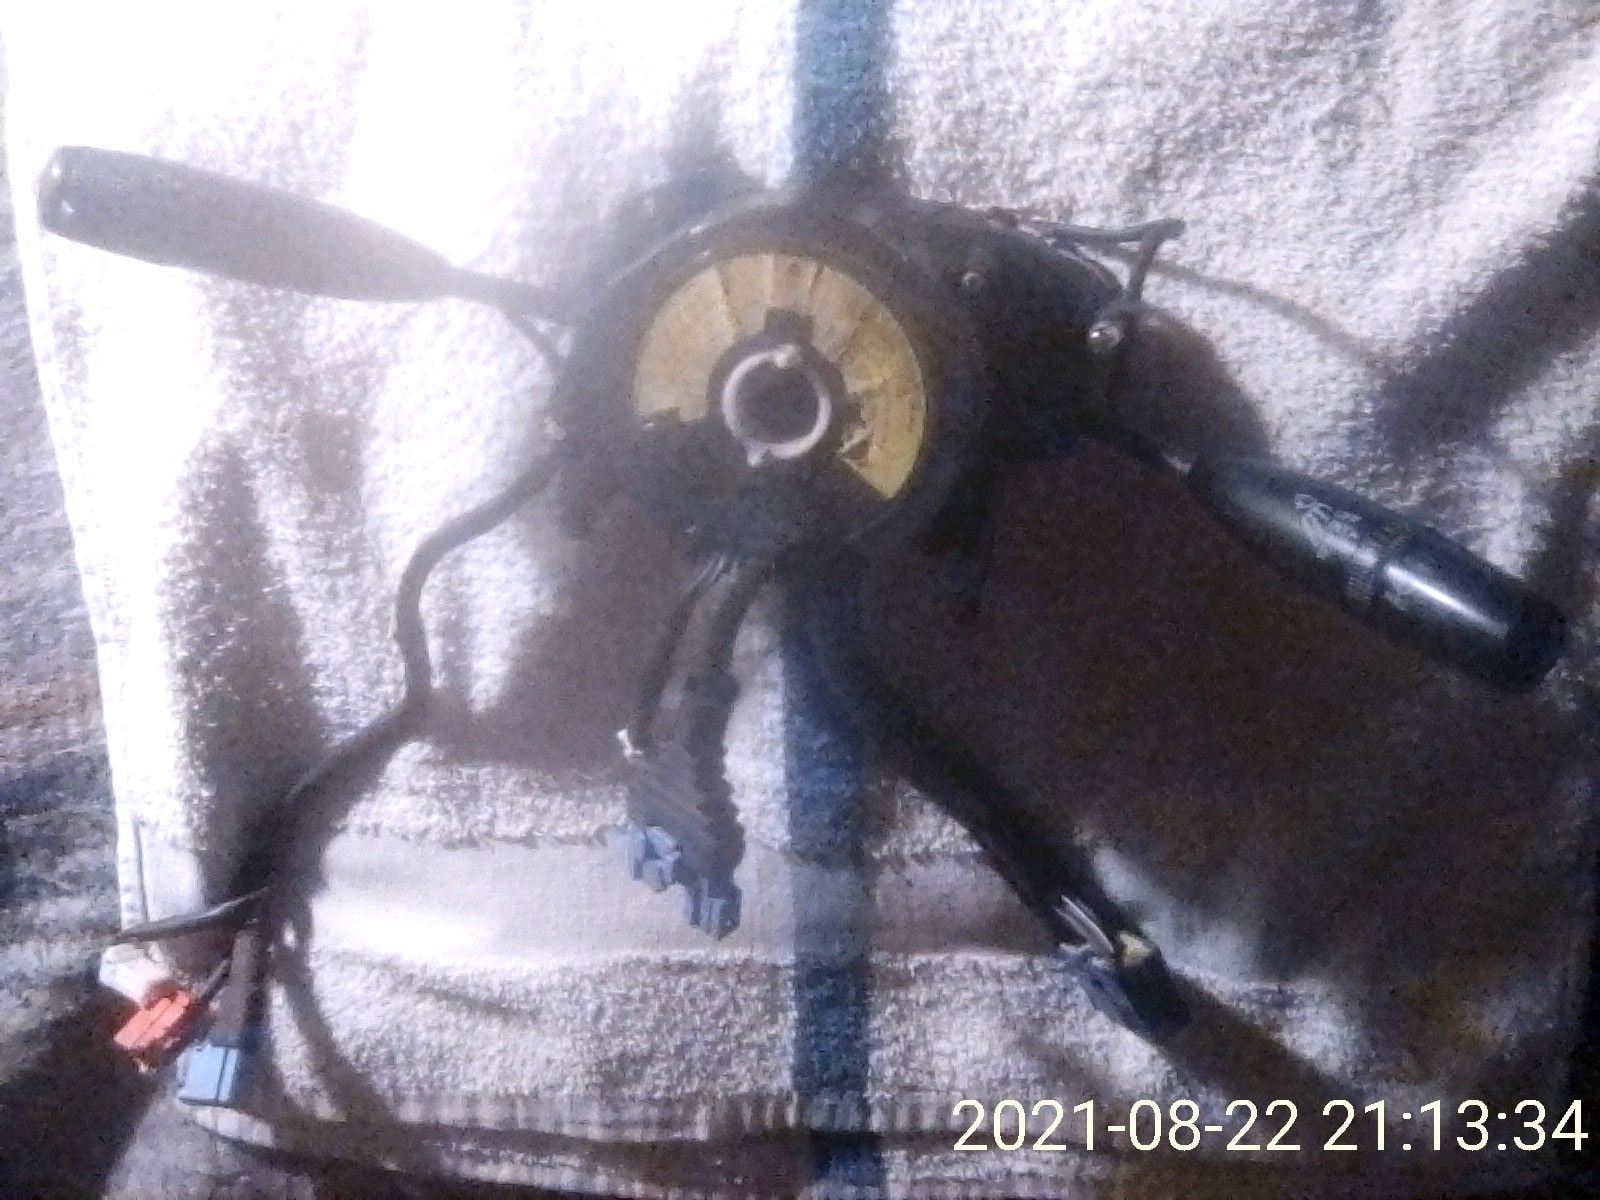 Miscellaneous - FD - OEM Steering Wheel Combination Switch - Used - 1993 to 1995 Mazda RX-7 - San Jose, CA 95121, United States